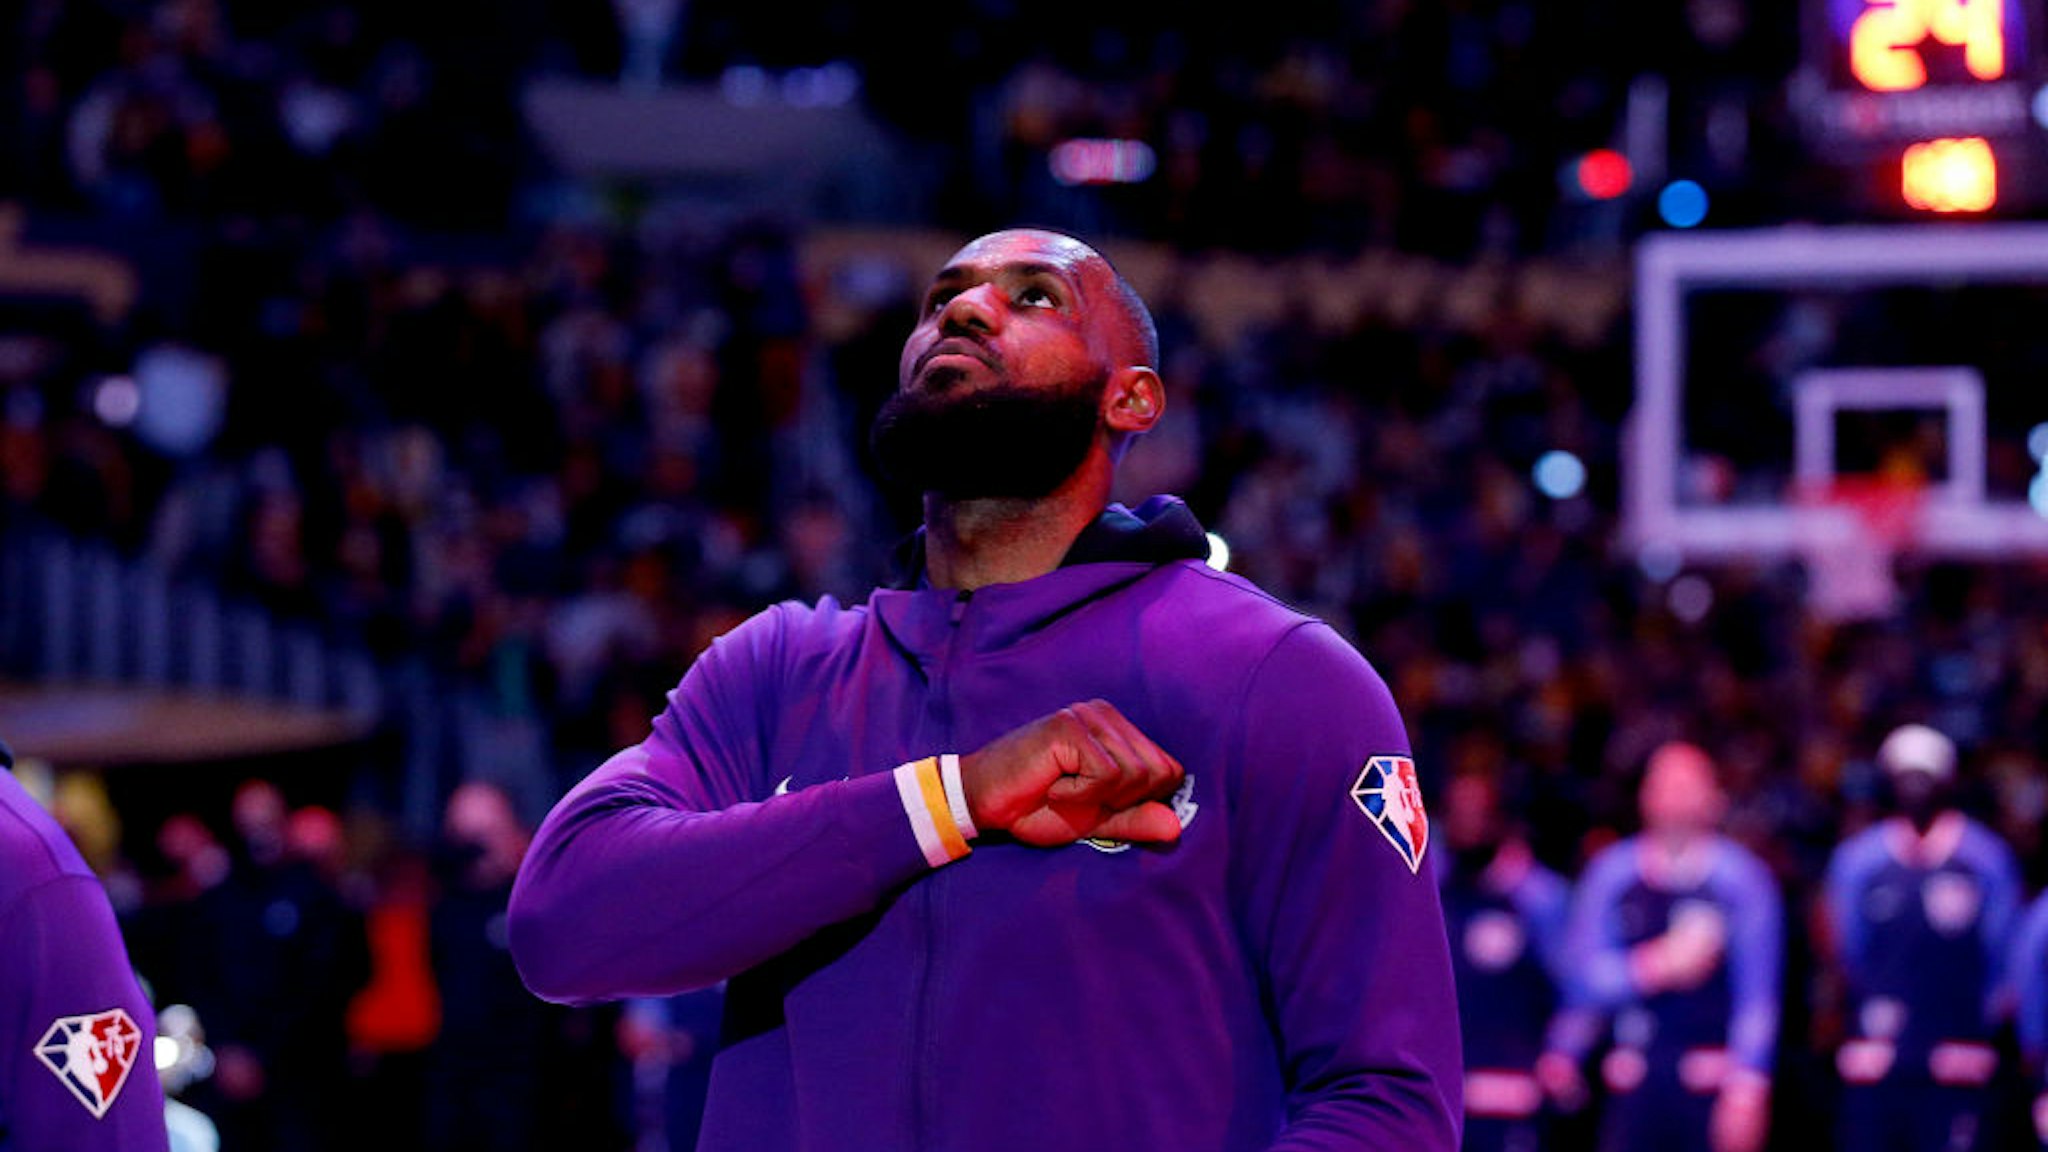 LOS ANGELES, CA - DECEMBER 25: Los Angeles Lakers forward LeBron James (6) before the start of a game against the Brooklyn Nets at Crypto.com Arena on Christmas Day Saturday, Dec. 25, 2021 in Los Angeles, CA. (Gary Coronado / Los Angeles Times via Getty Images)